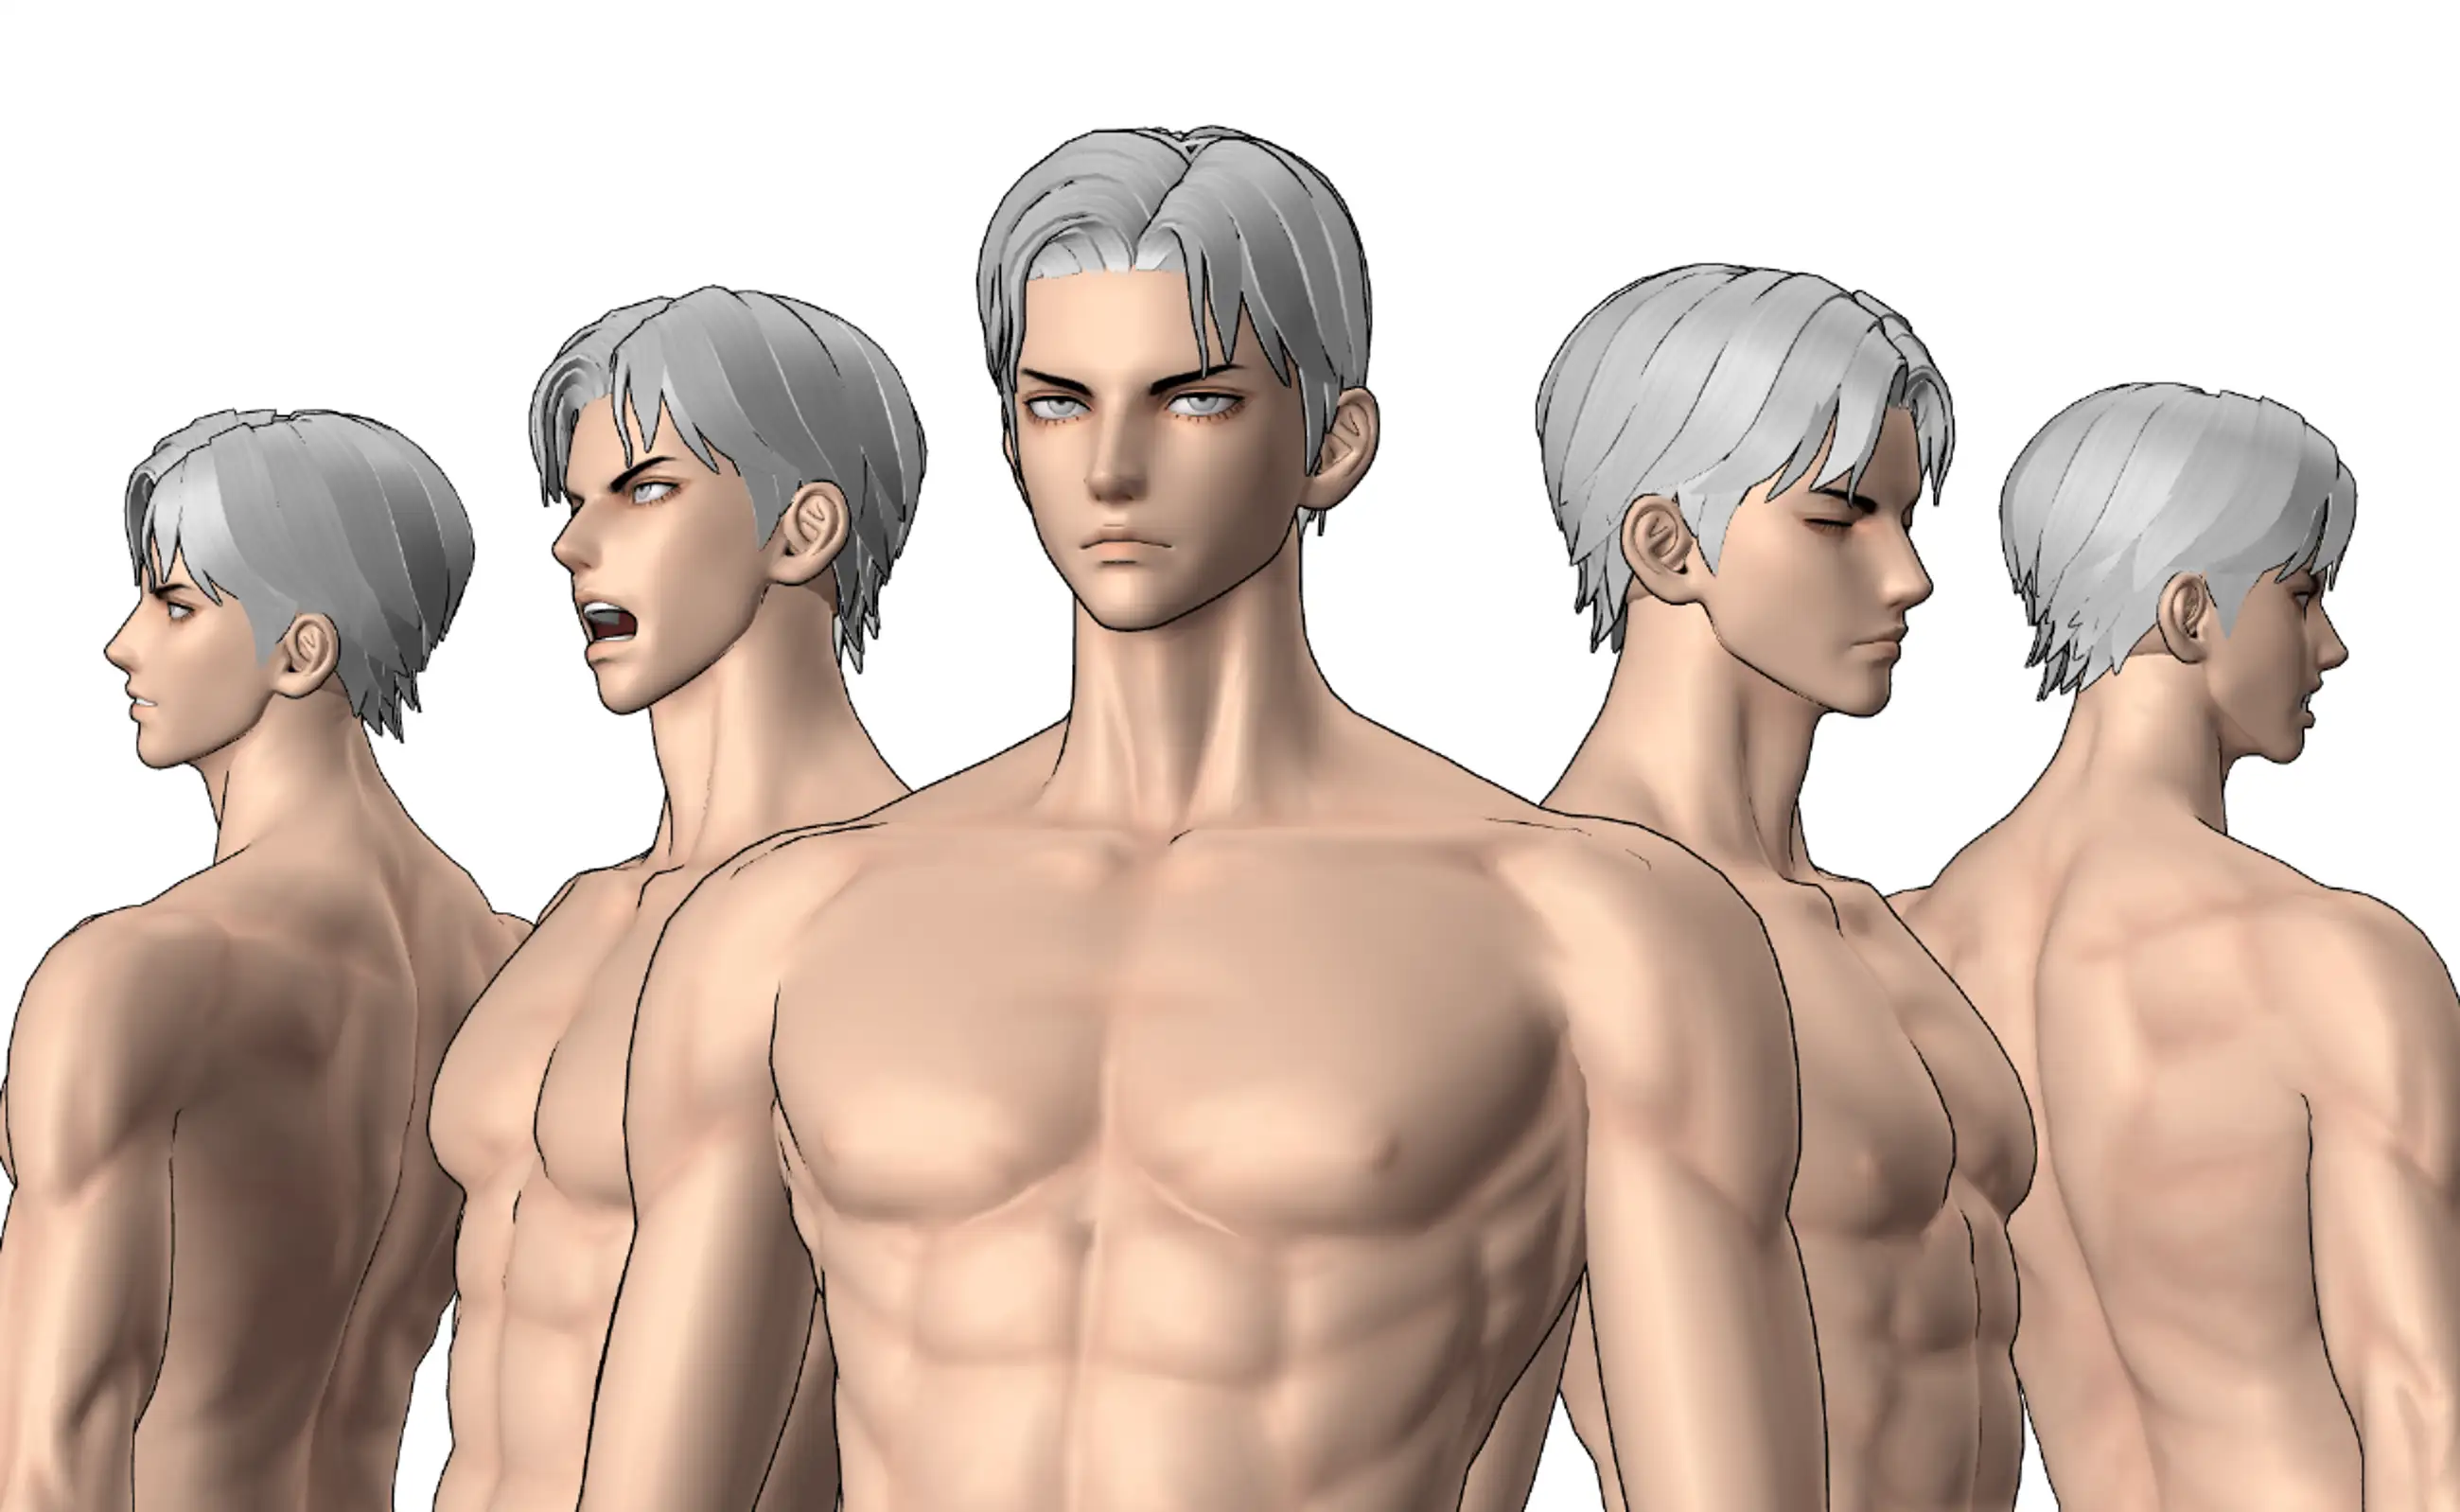 Slim athletic male body 3D Modelling / Full Body Set (With Head Modelling)